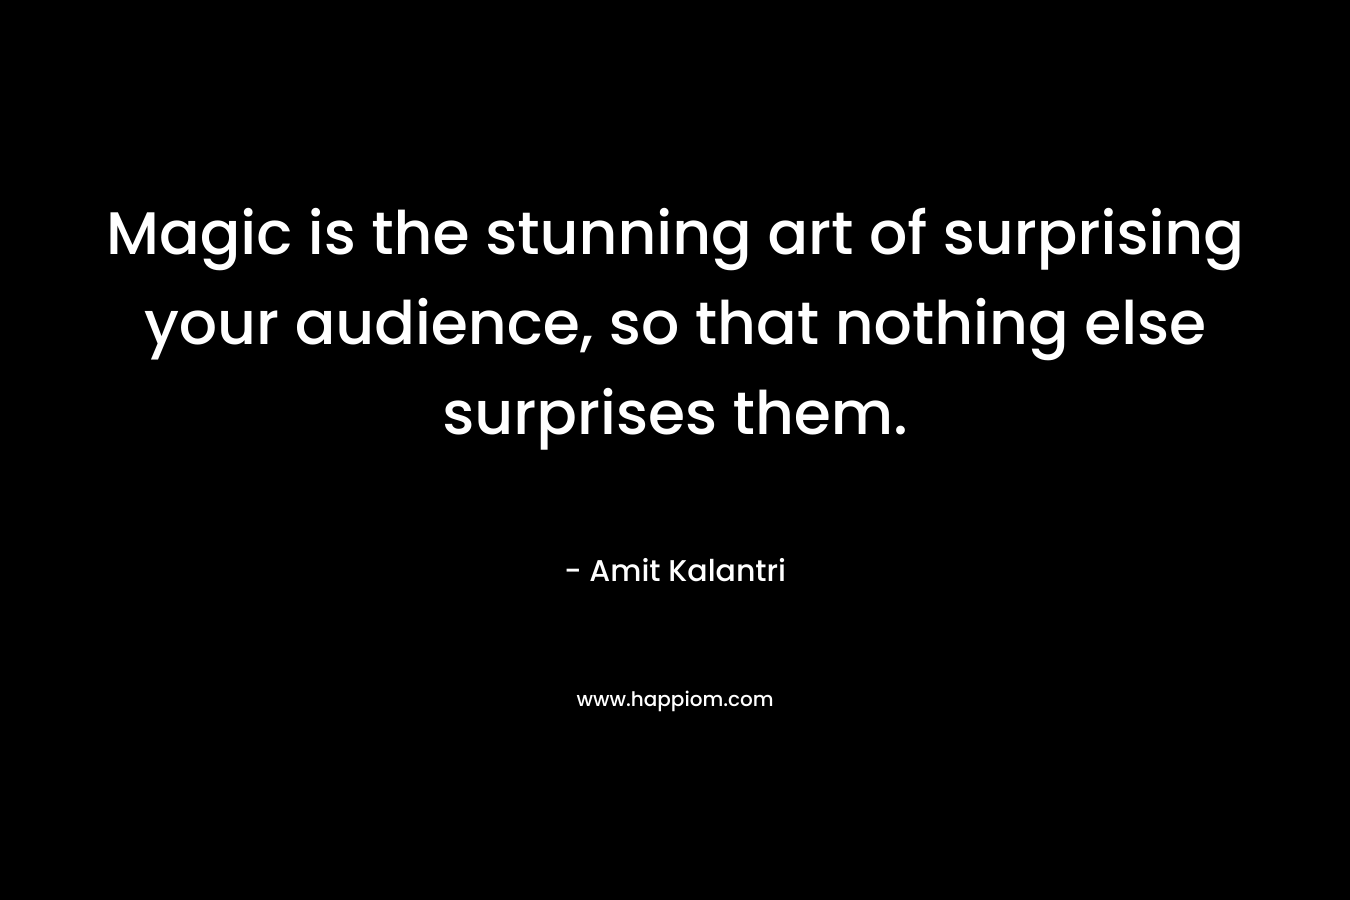 Magic is the stunning art of surprising your audience, so that nothing else surprises them.